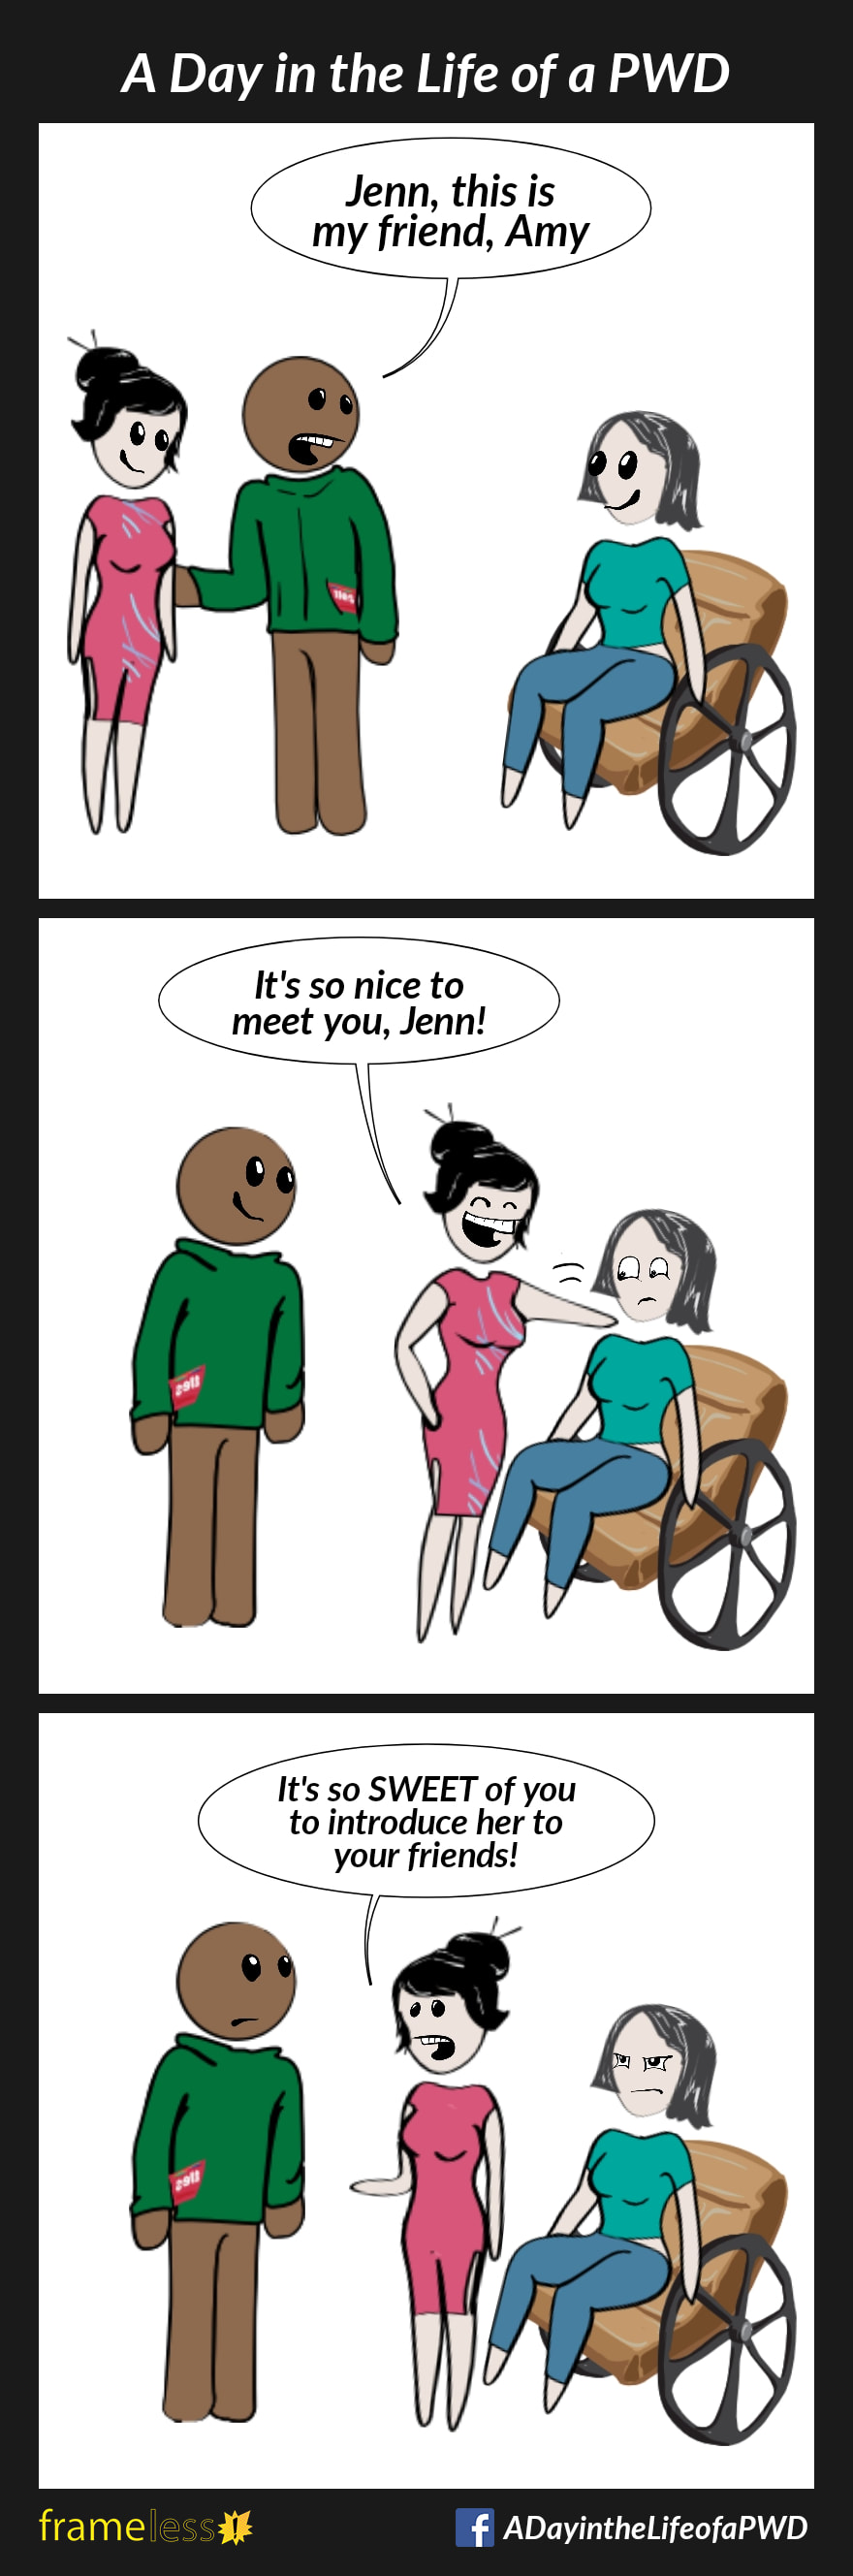 Frame 1:
Jenn, a woman in a wheelchair, is approached by her friend and another woman. 
FRIEND: Jenn, this is my friend, Amy.

Frame 2:
Amy pats Jenn's shoulder.
AMY: It's so nice to meet you, Jenn!

Frame 3:
AMY (to friend): It's so SWEET of you to introduce her to your friends!